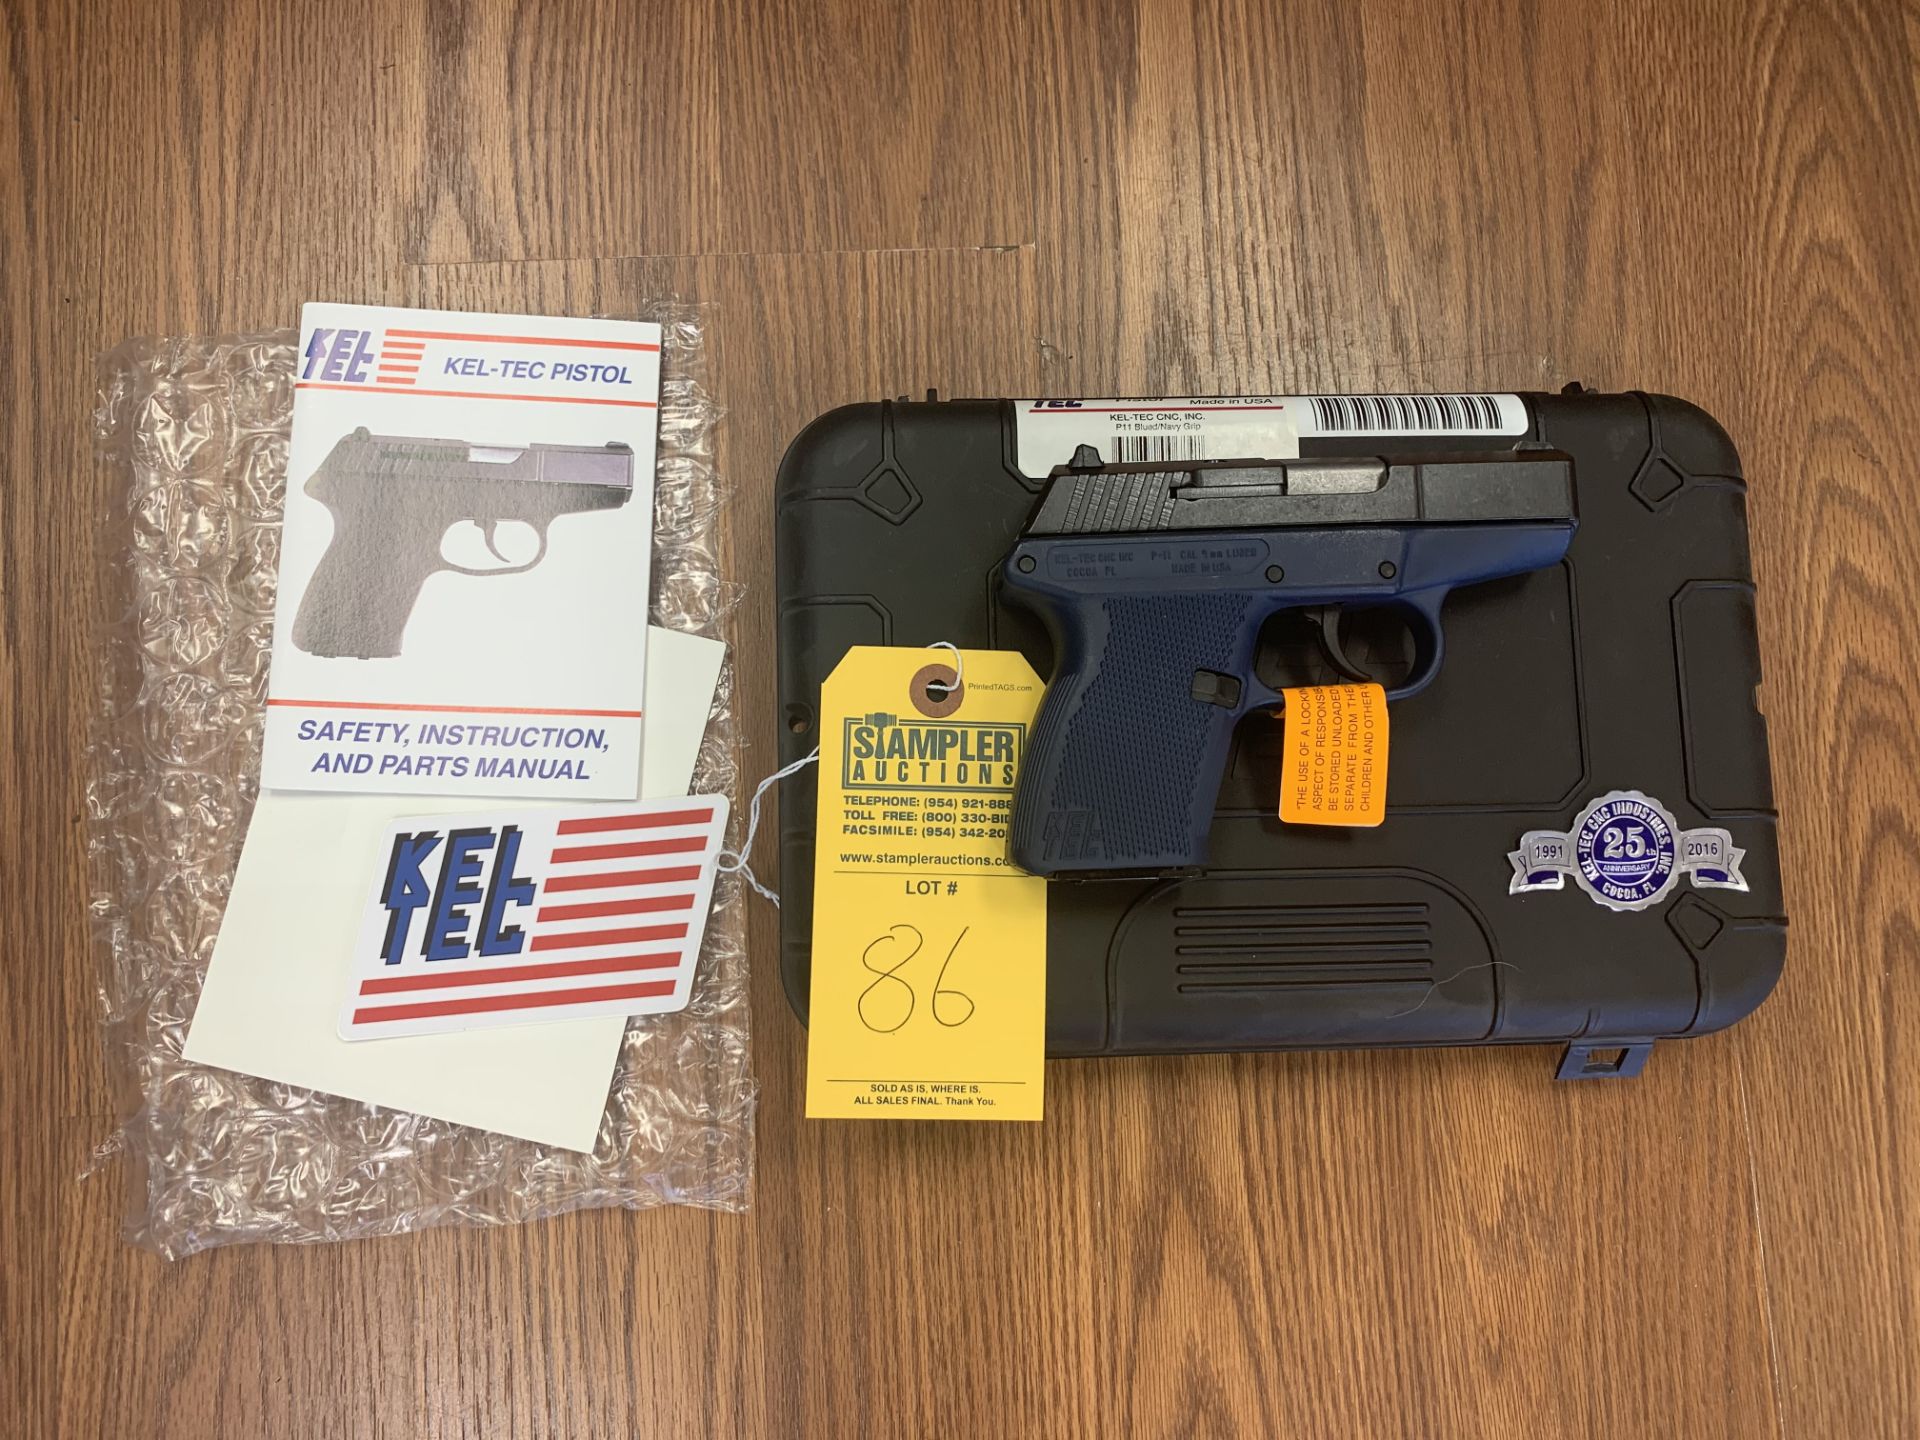 KELTEC P-11 PISTOL 9MM LUGER - NAVY BLUE - WITH BOX (NEW)